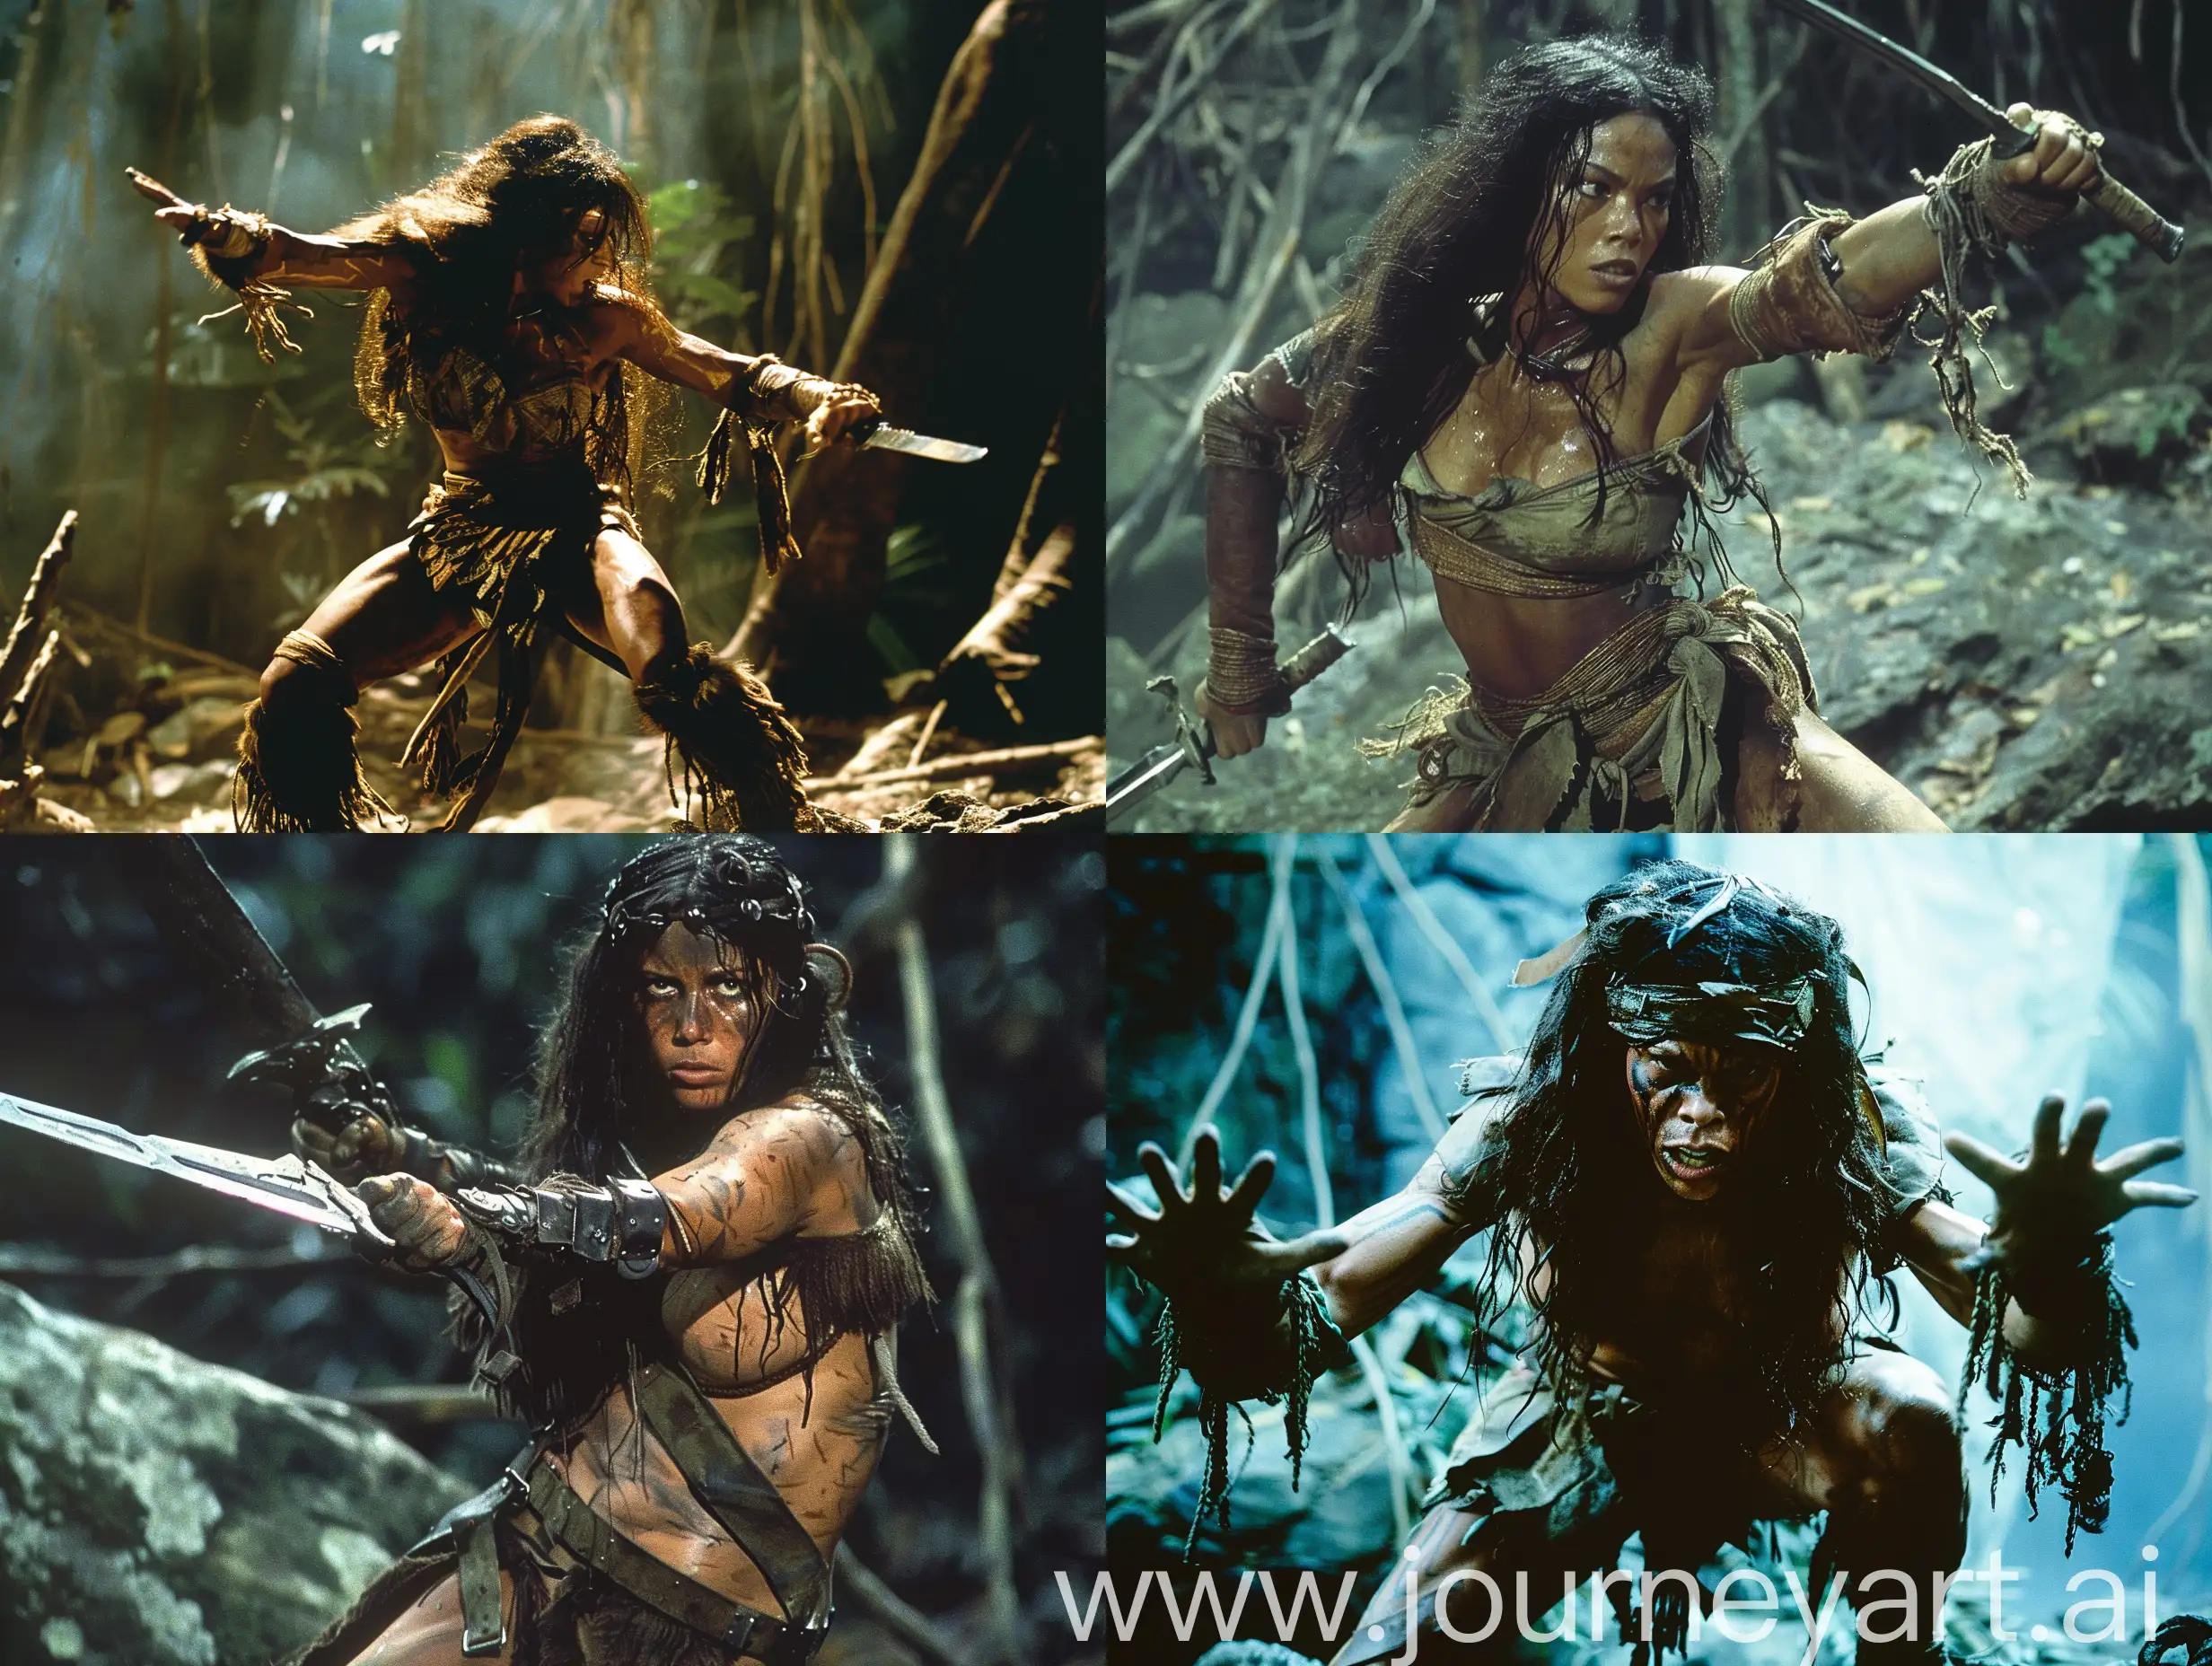 Dynamic-Feral-Female-Barbarian-in-Epic-Action-Scene